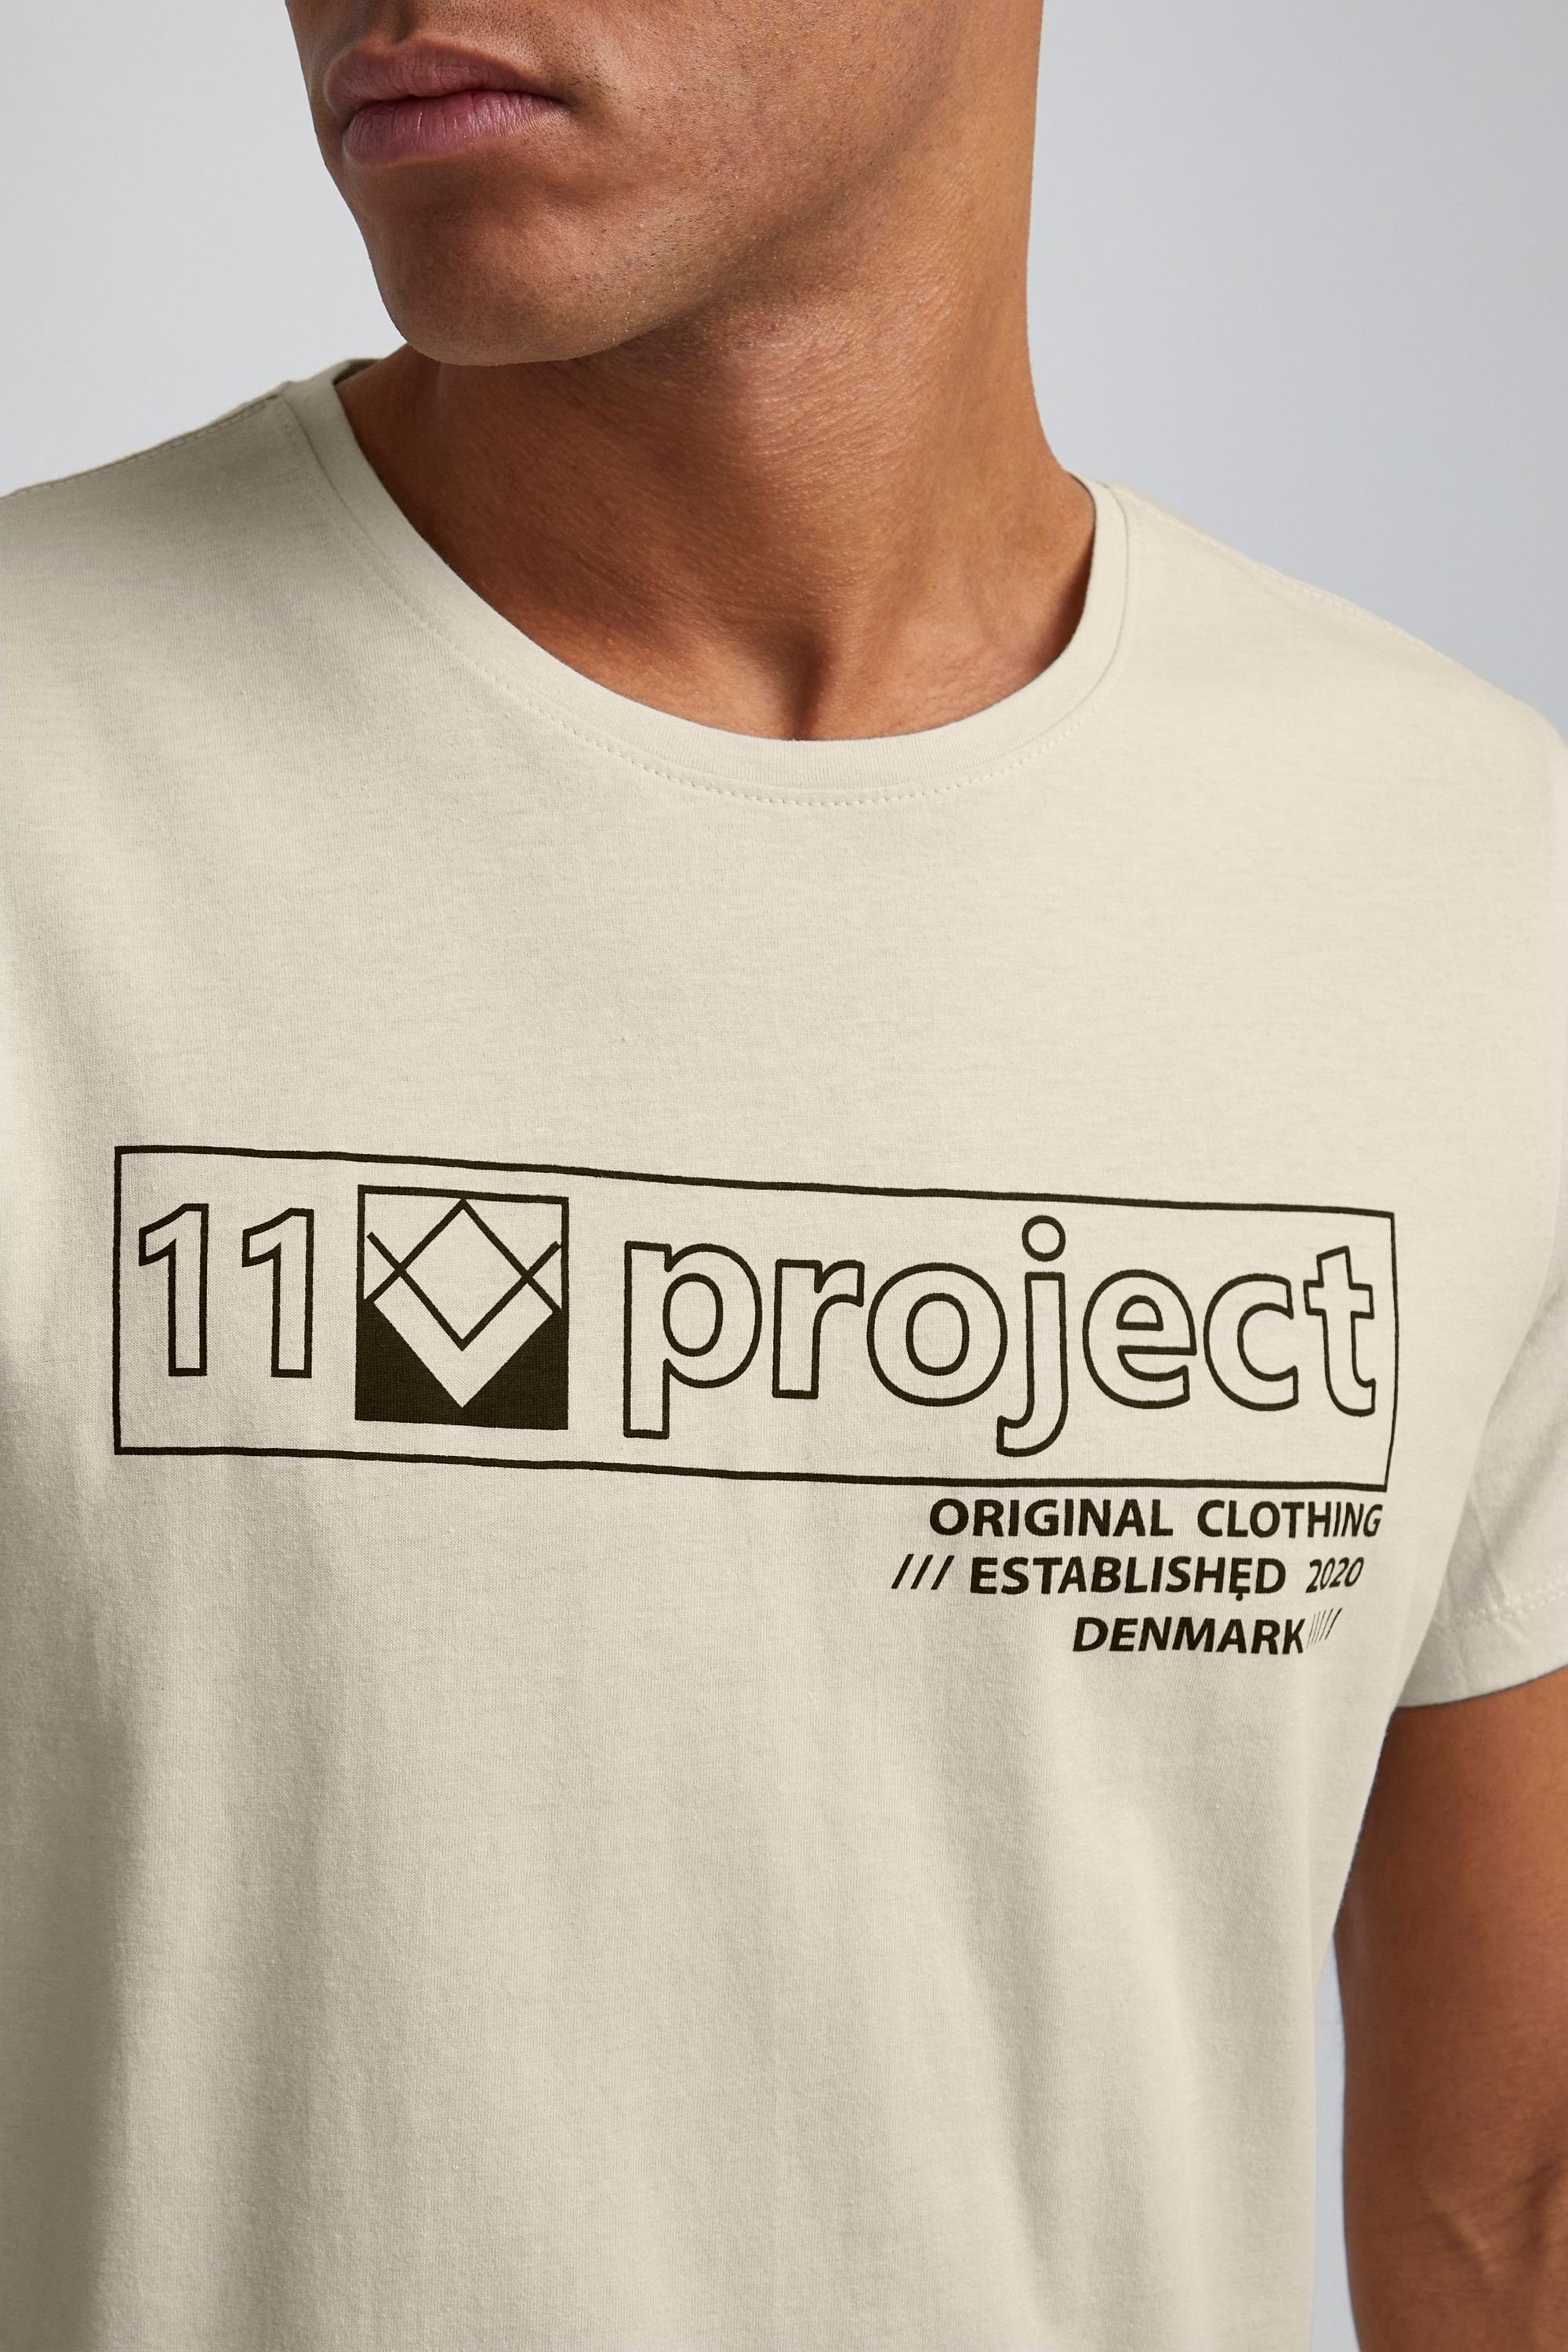 11 Project T-Shirt Project 11 Oyster PRMattis Gray